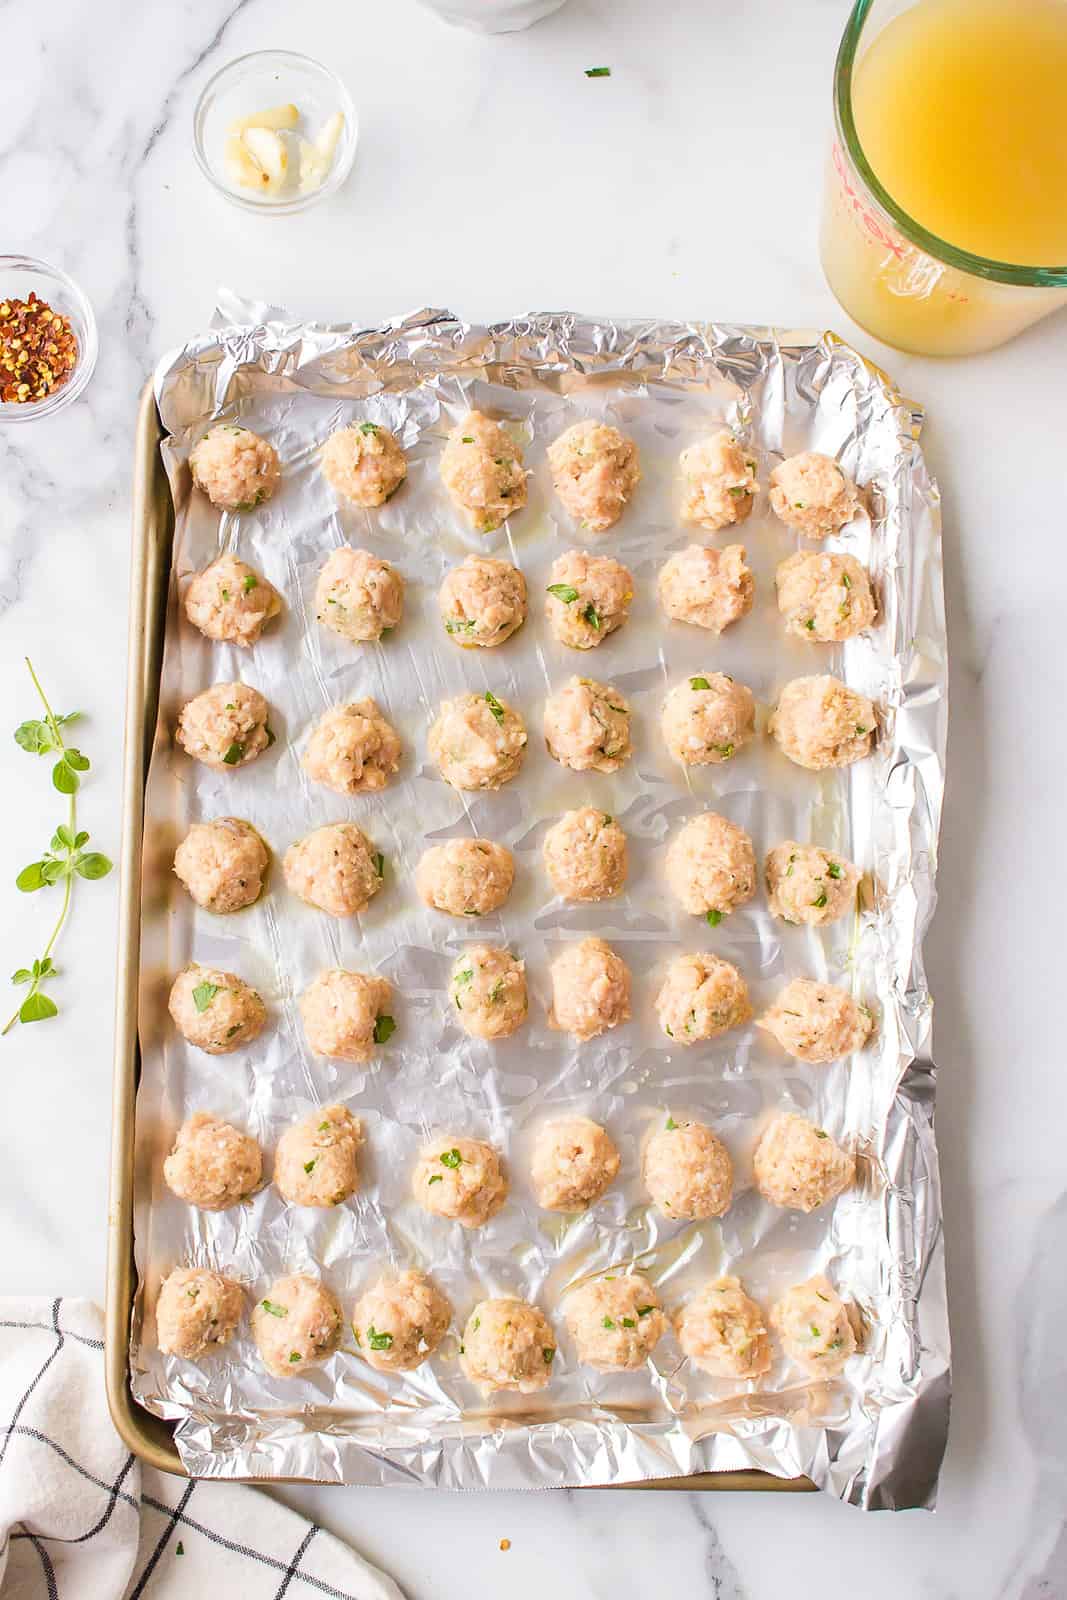 Meat mixture shaped into meatballs and placed on a foil lined baking sheet.